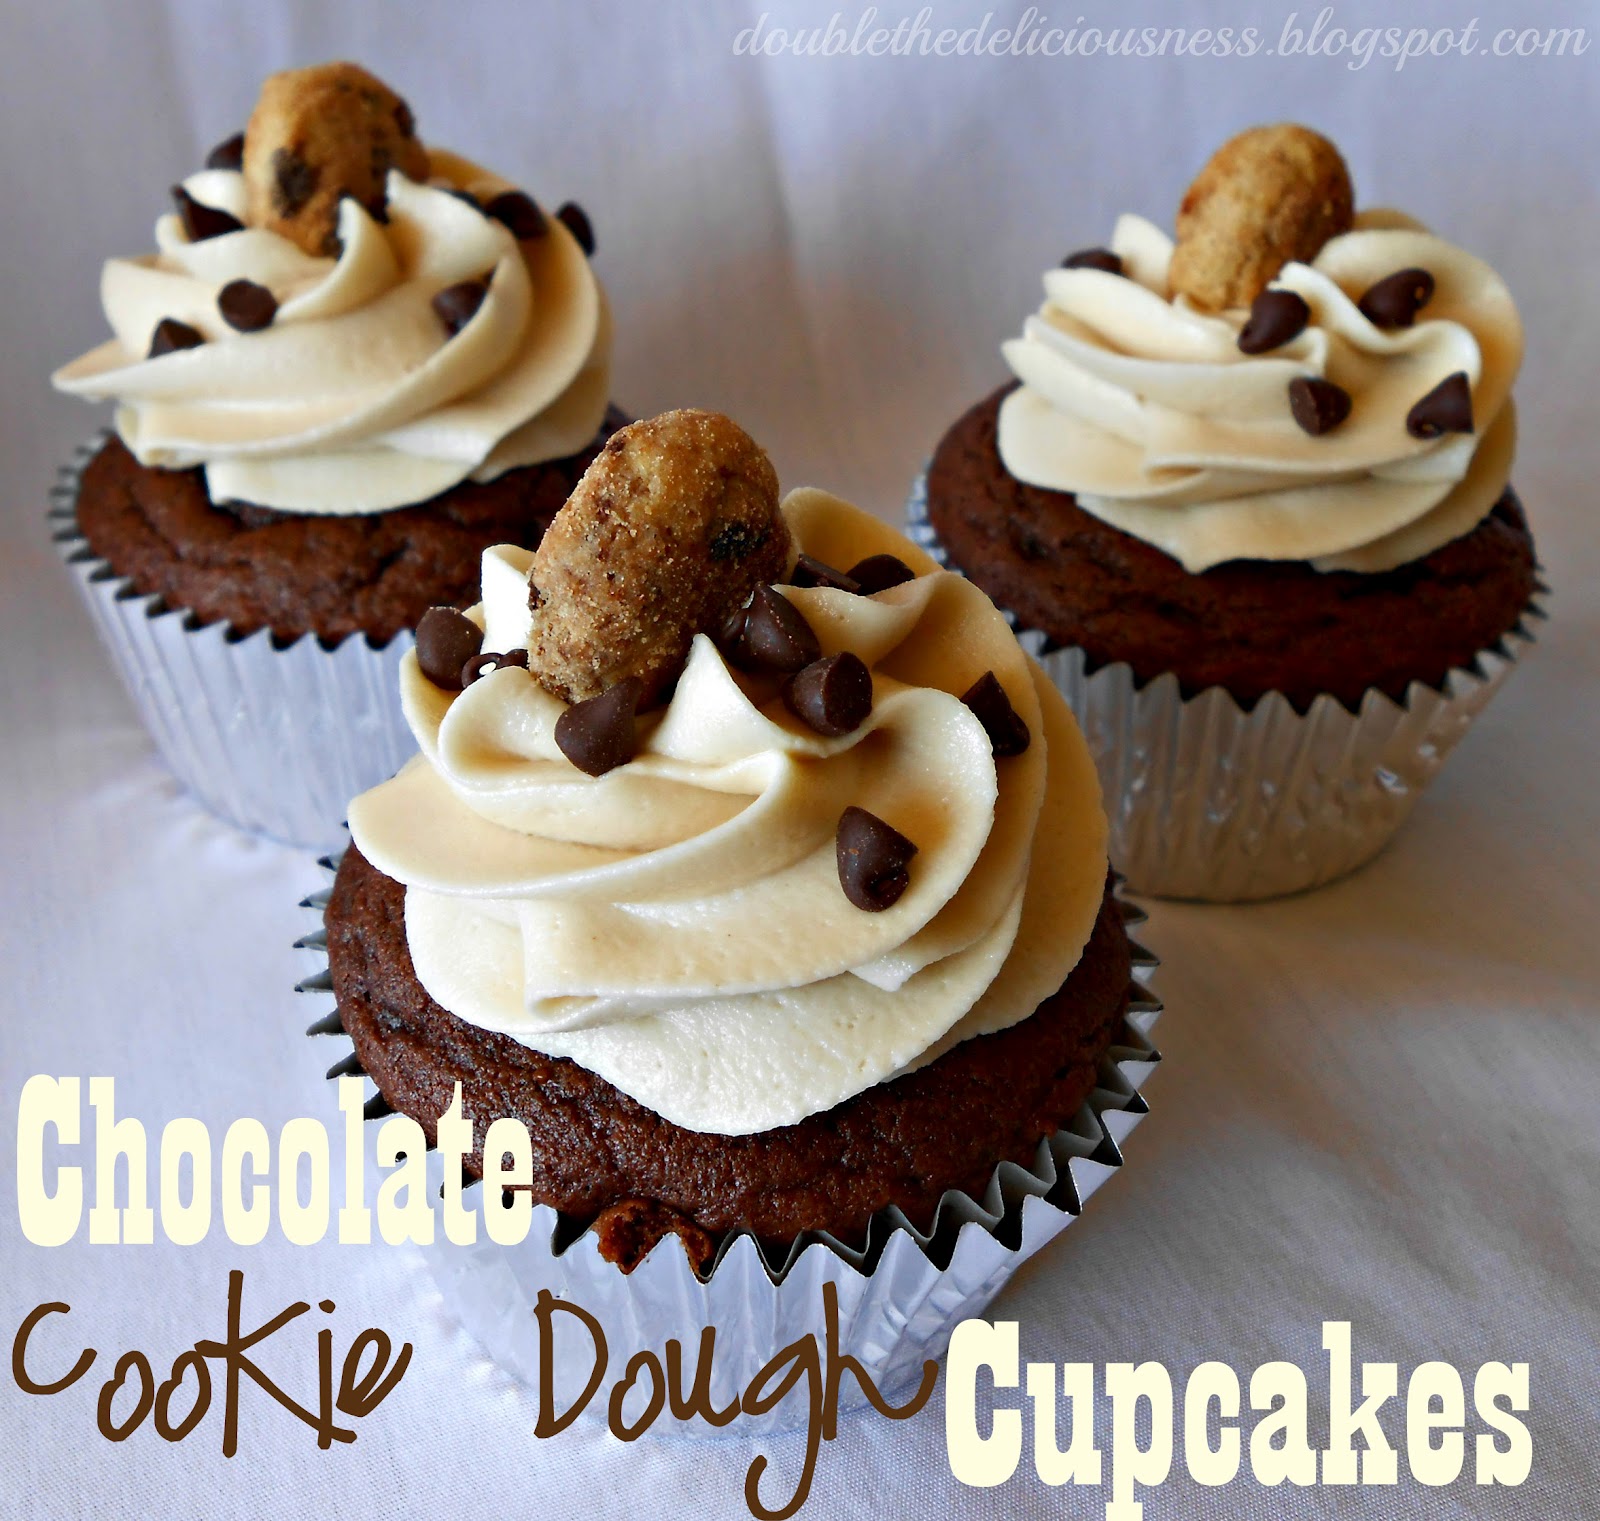 Double the Deliciousness: Chocolate Cookie Dough Cupcakes